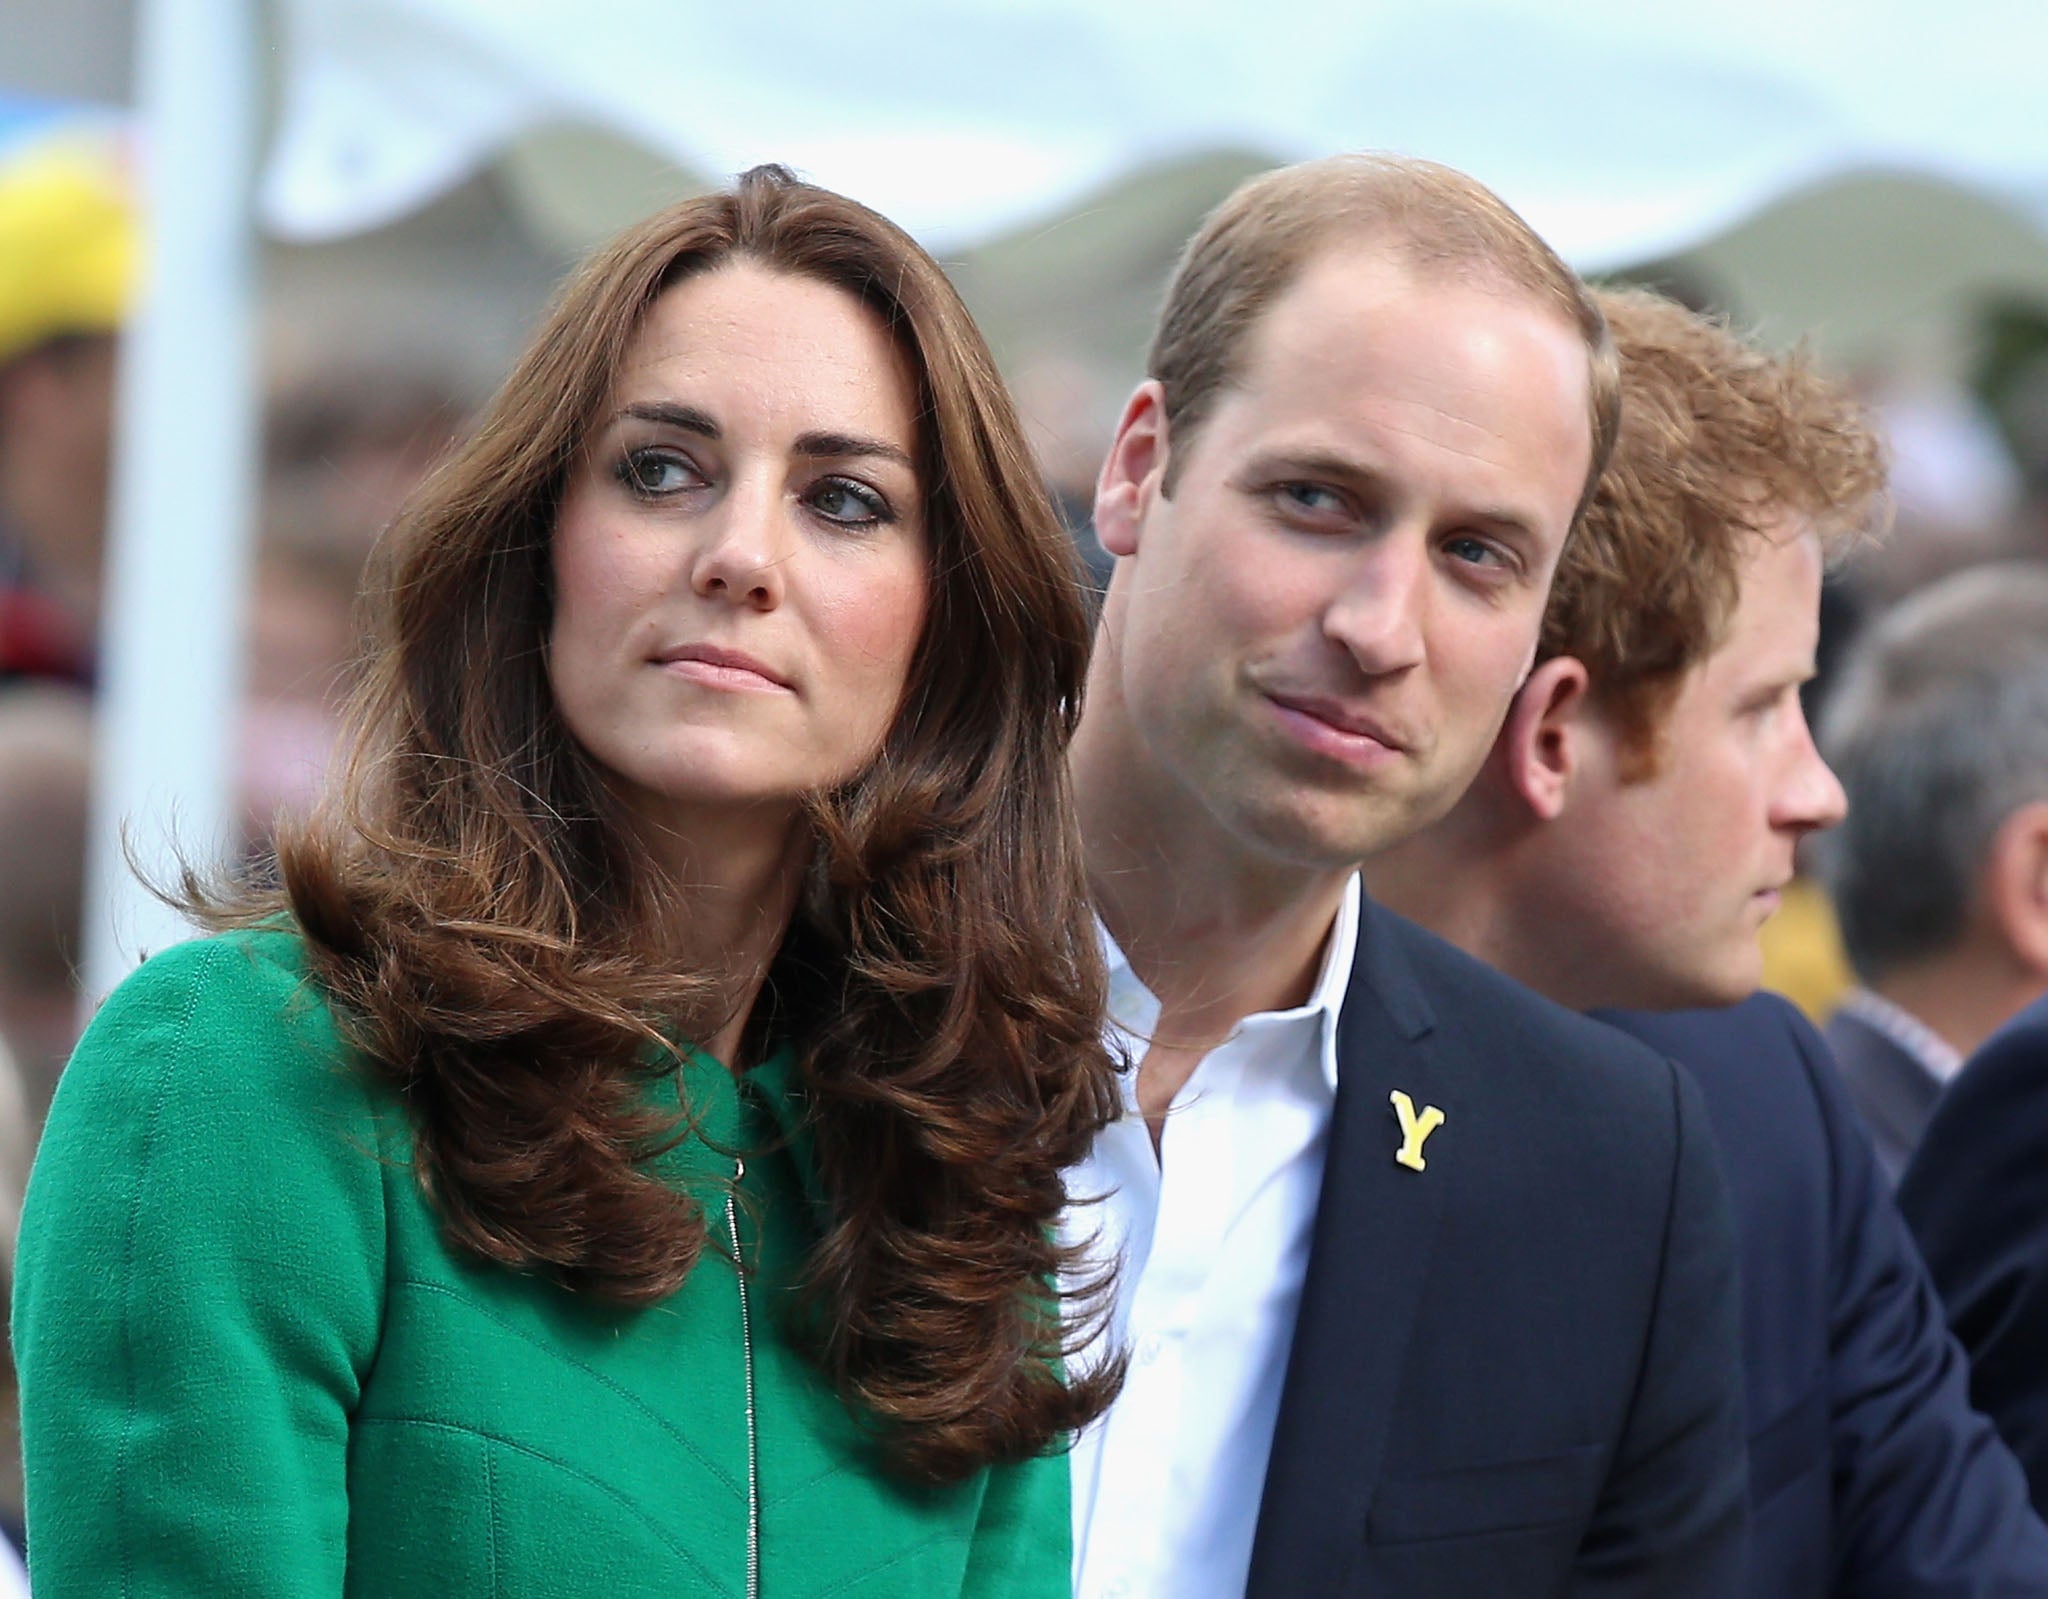 The Duchess of Cambridge is suffering from hyperemesis gravidarum which causes severe nausea and vomiting